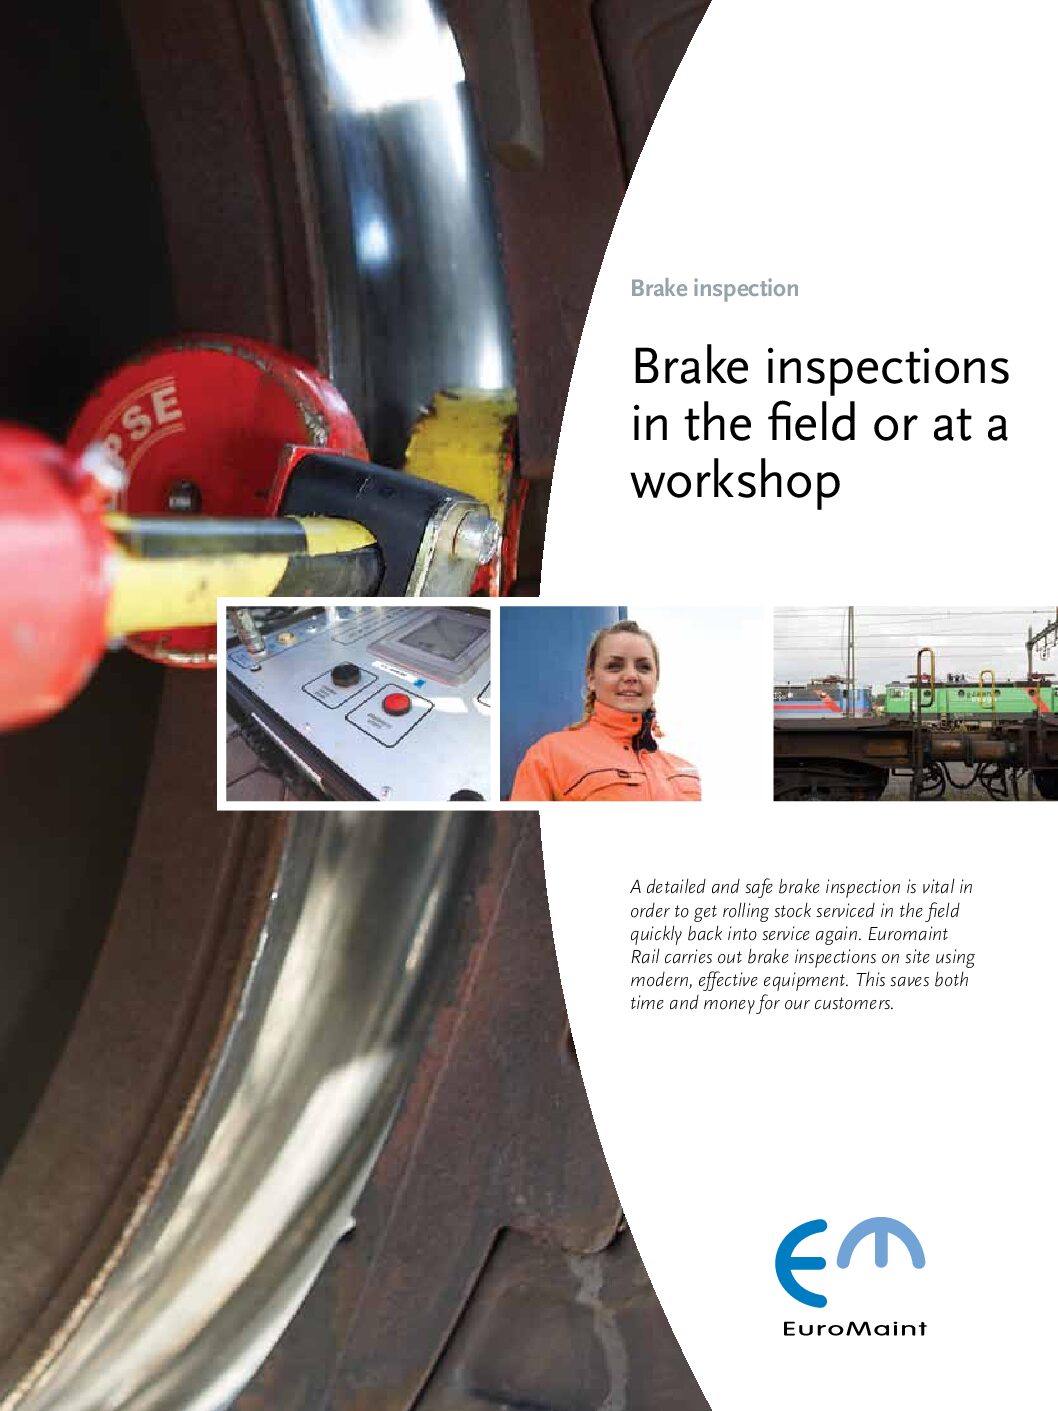 Train Brake Inspections in the Field or at a Workshop